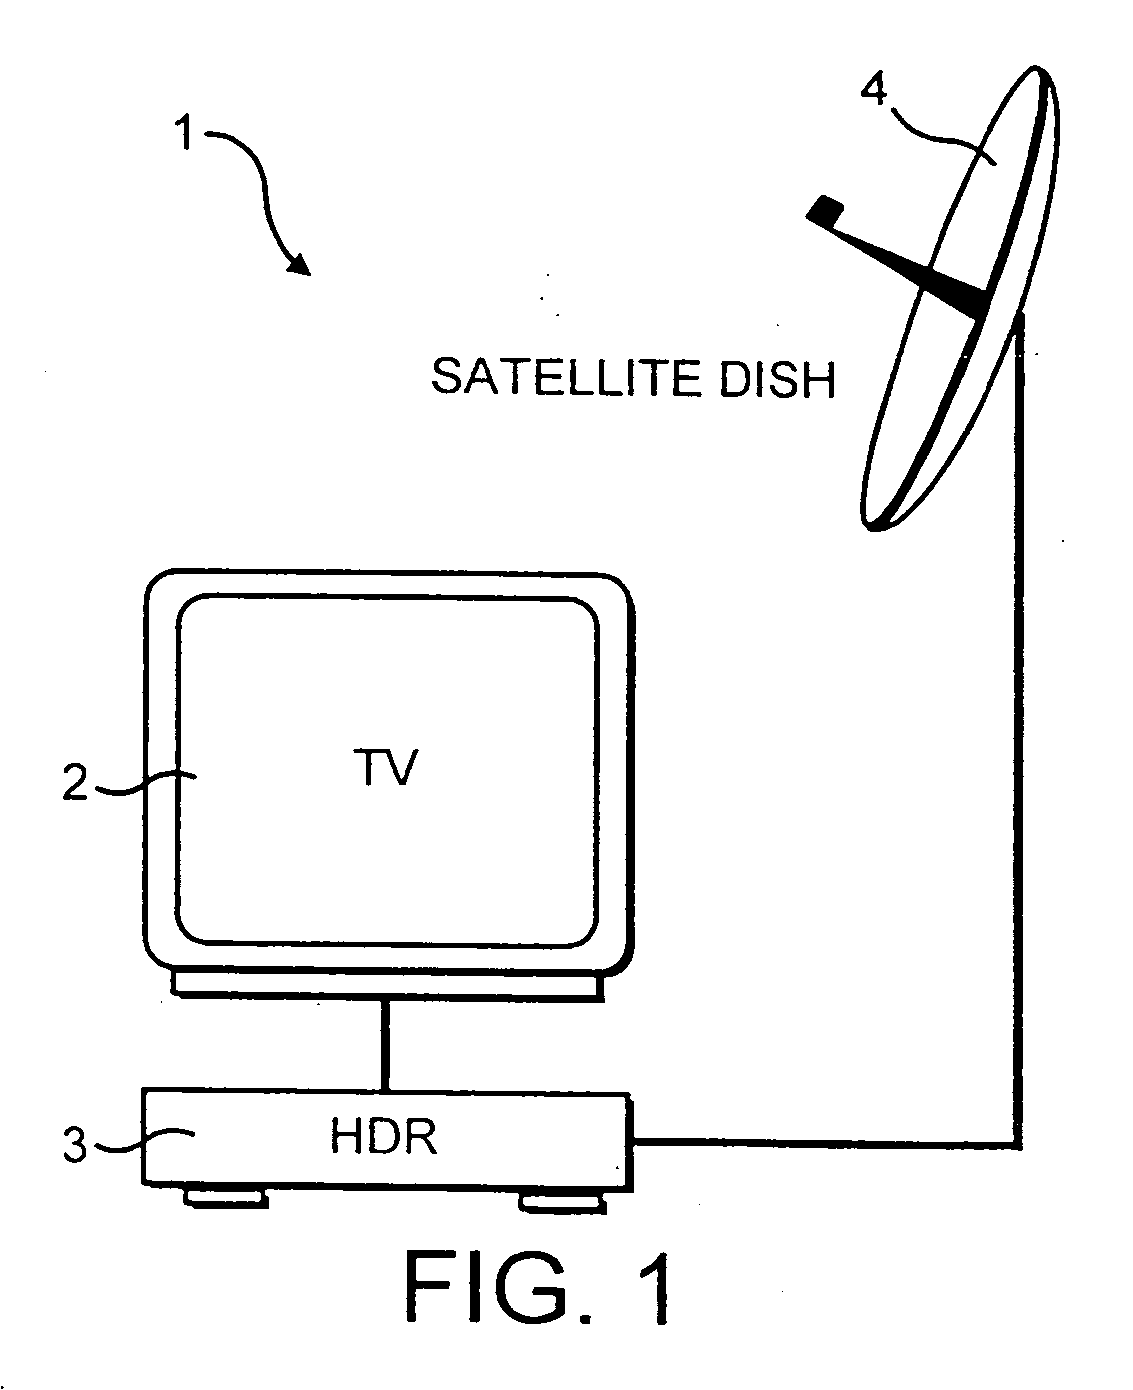 Receivers for television signals